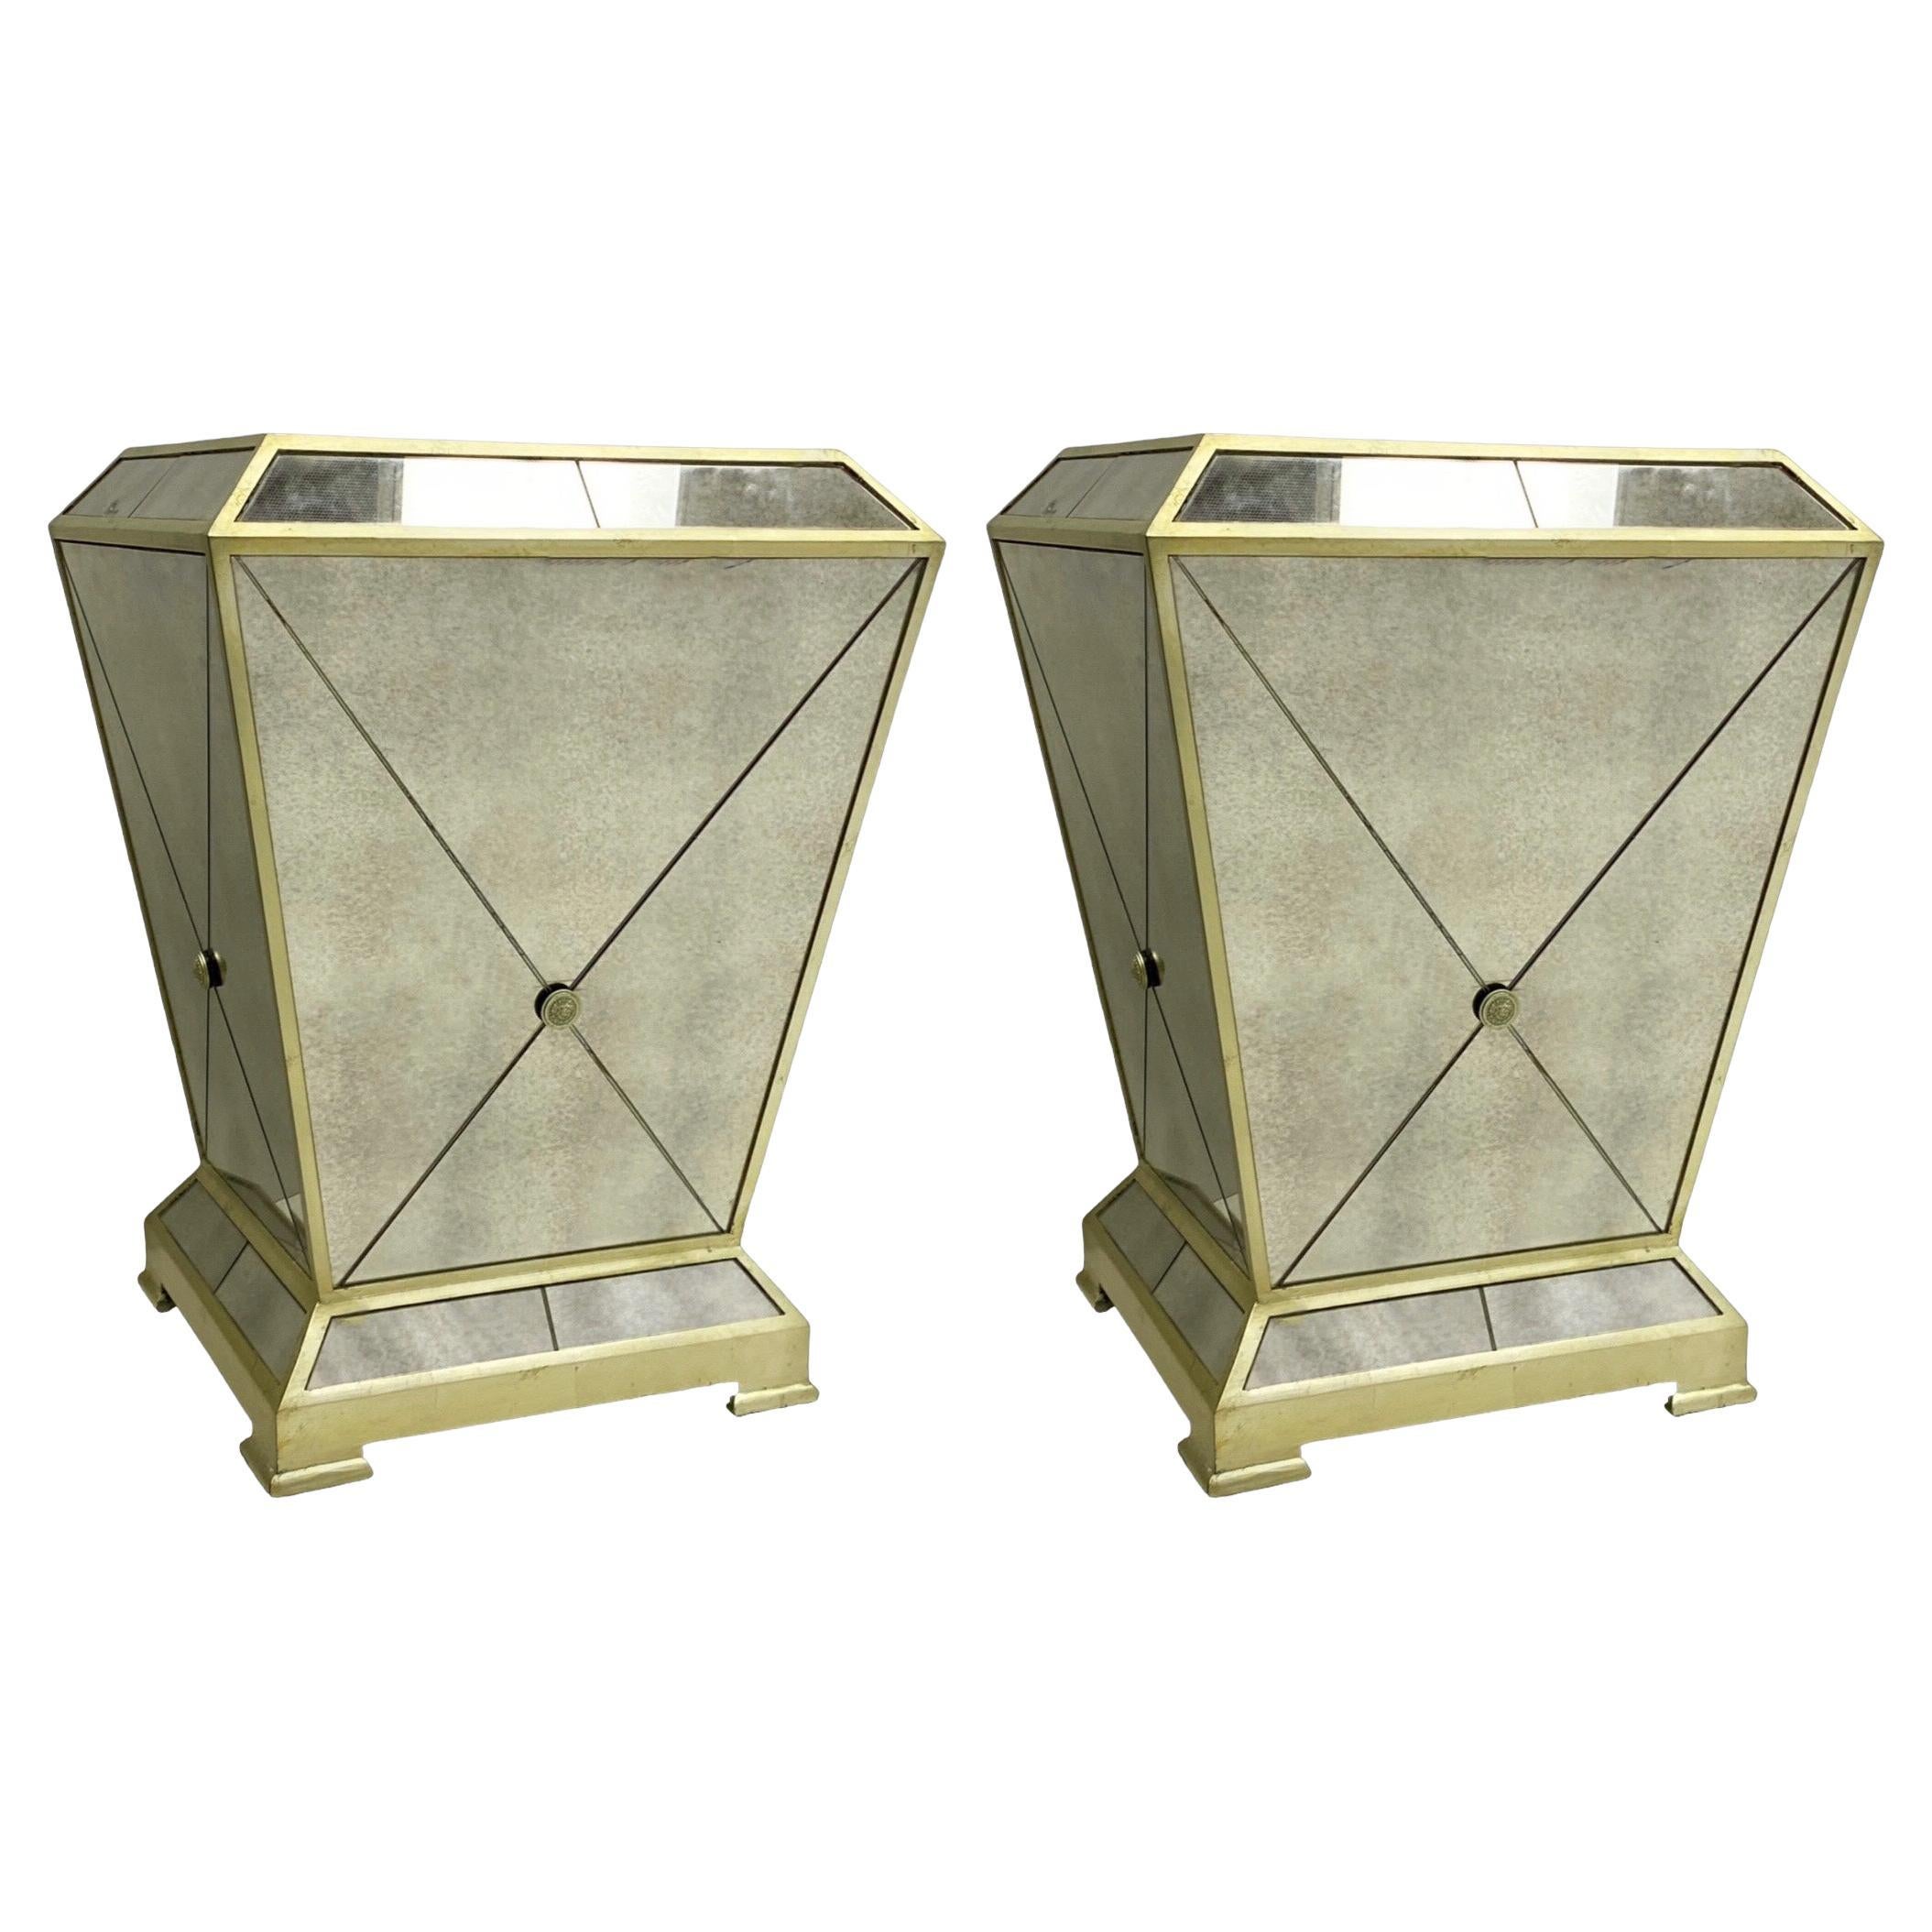 1980s Large Neo-Classical Style Mirror & Brass Pedestals or Side Tables - Pair For Sale